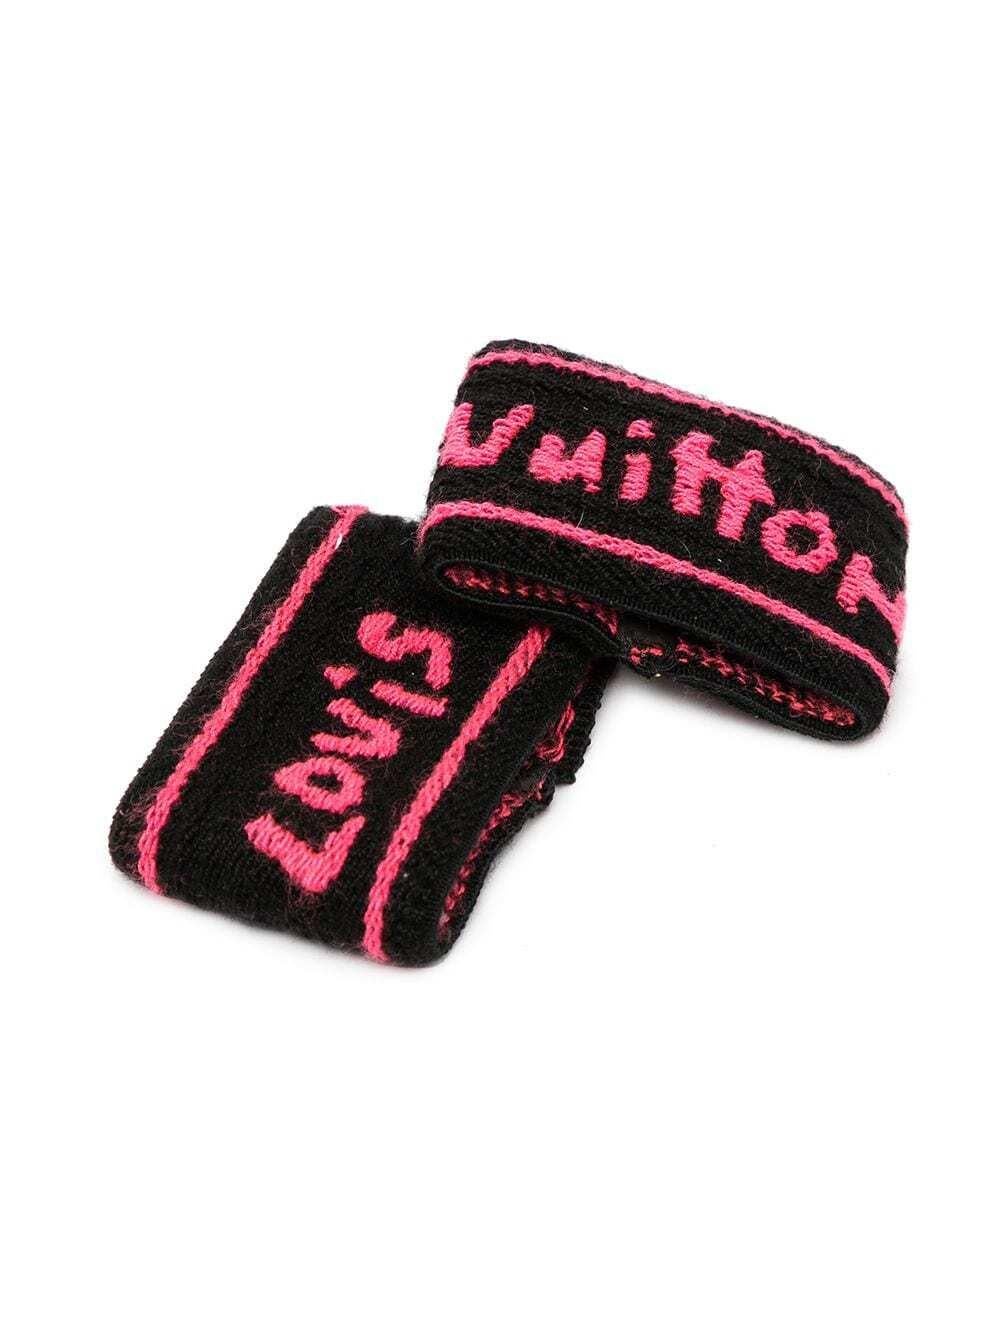 Add some flair to your sporting attire with these pre-owned Louis Vuitton logo-print wristbands. From the iconic 2001 collaboration with Stephen Sprouse, the wristbands feature the Louis Vuitton logo in neon pink with a gold-tone logo plaque.